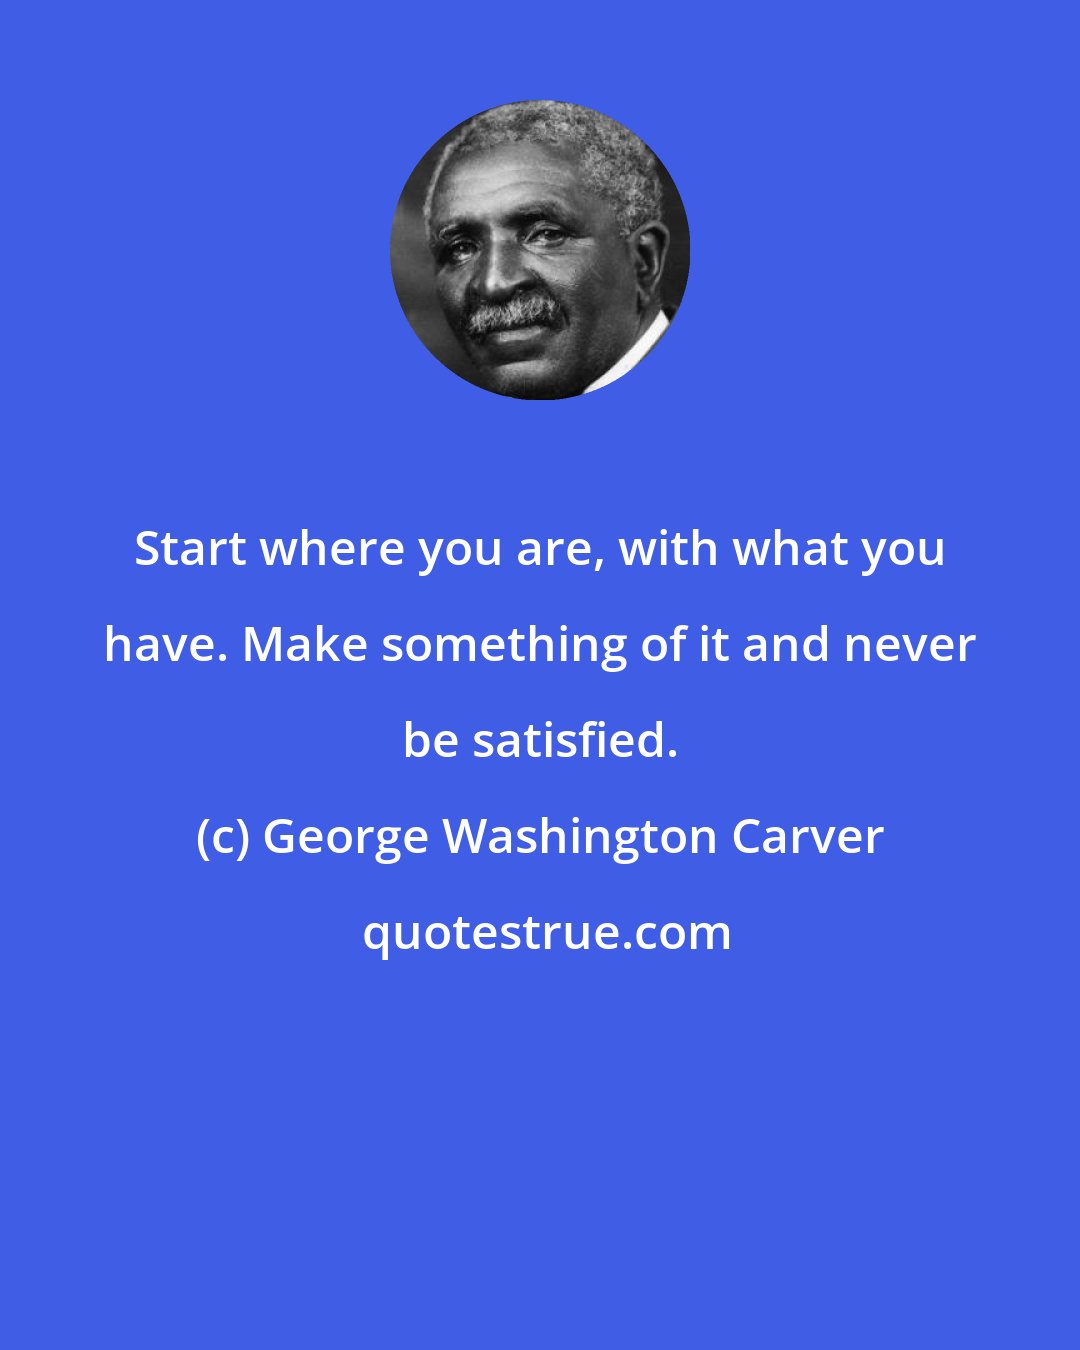 George Washington Carver: Start where you are, with what you have. Make something of it and never be satisfied.